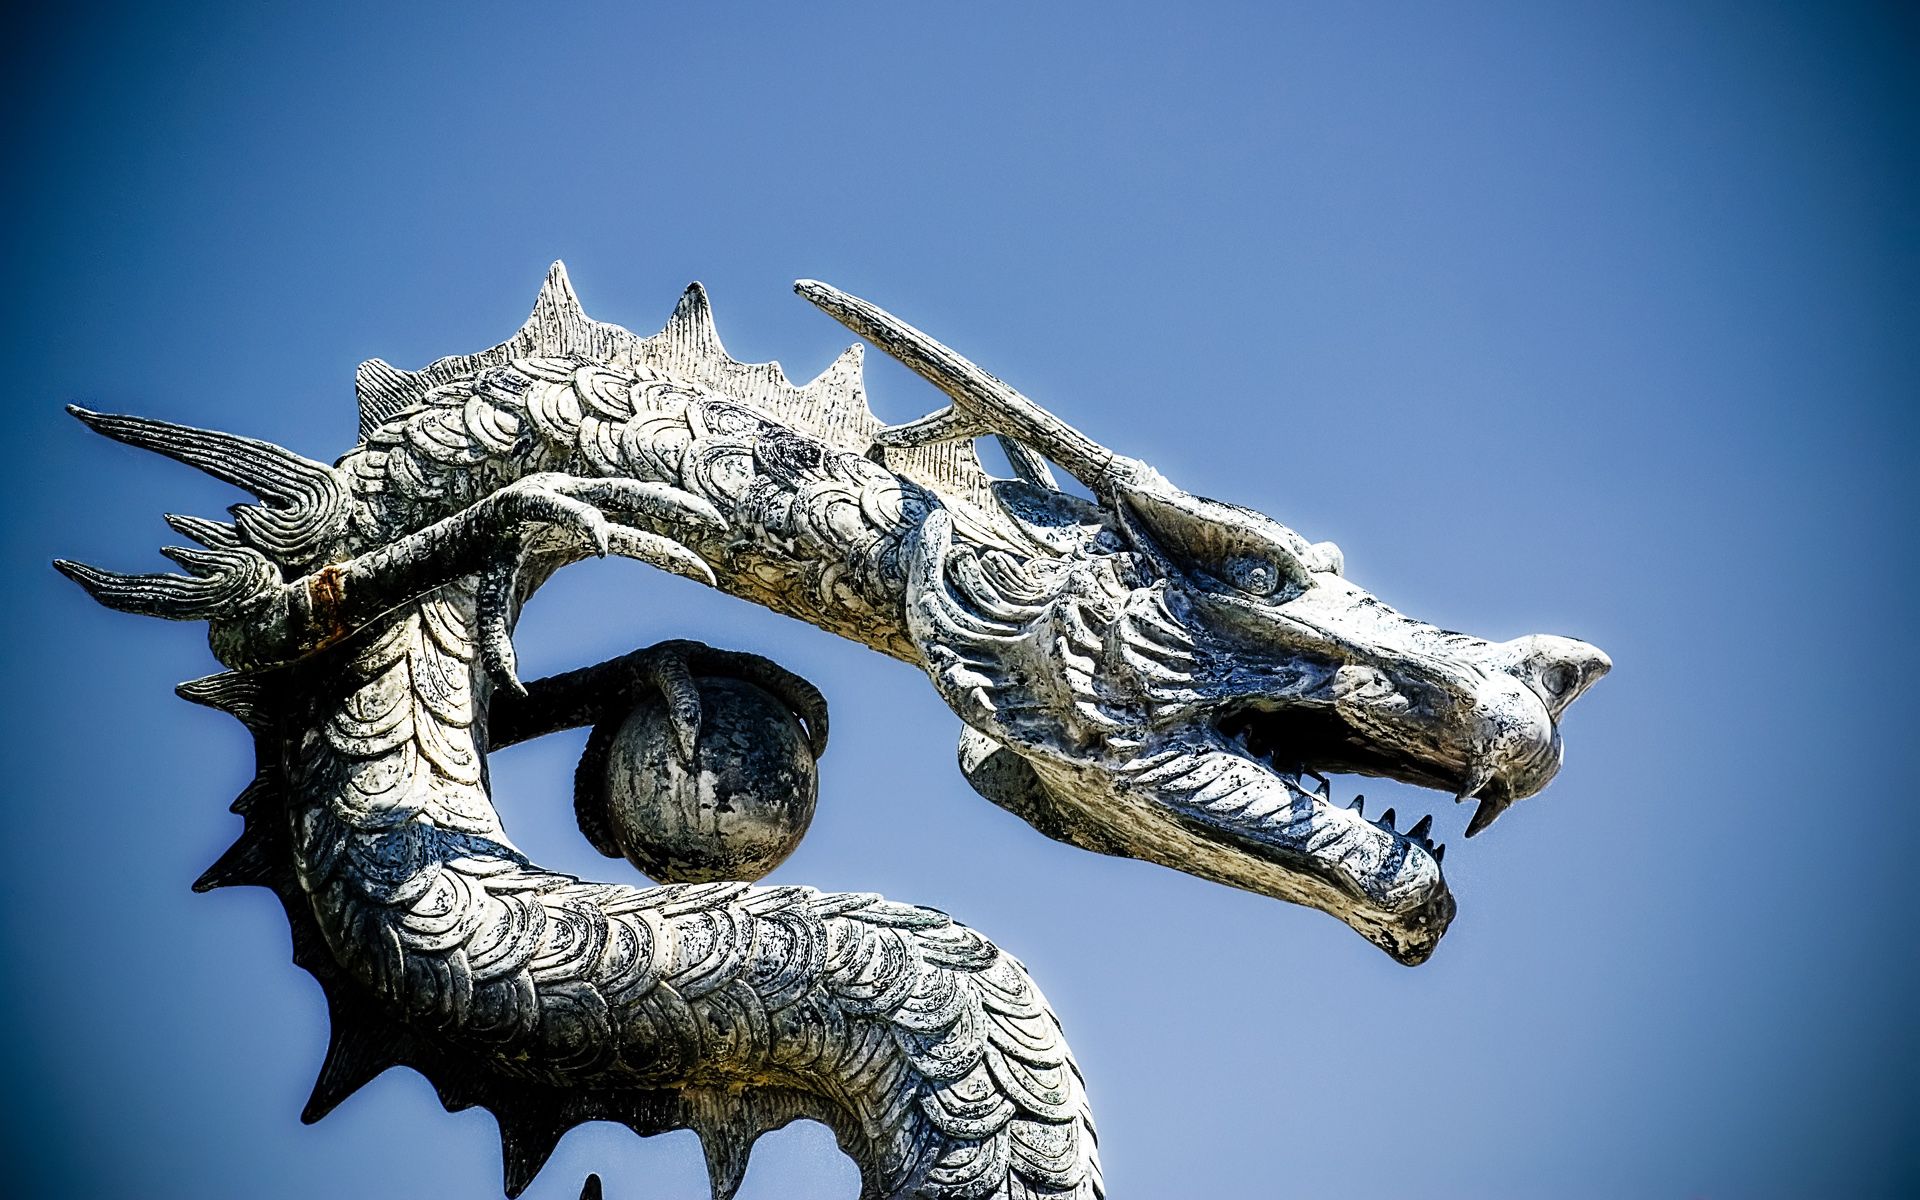 Chinese dragon statue against a blue sky Spain HD Wallpapers